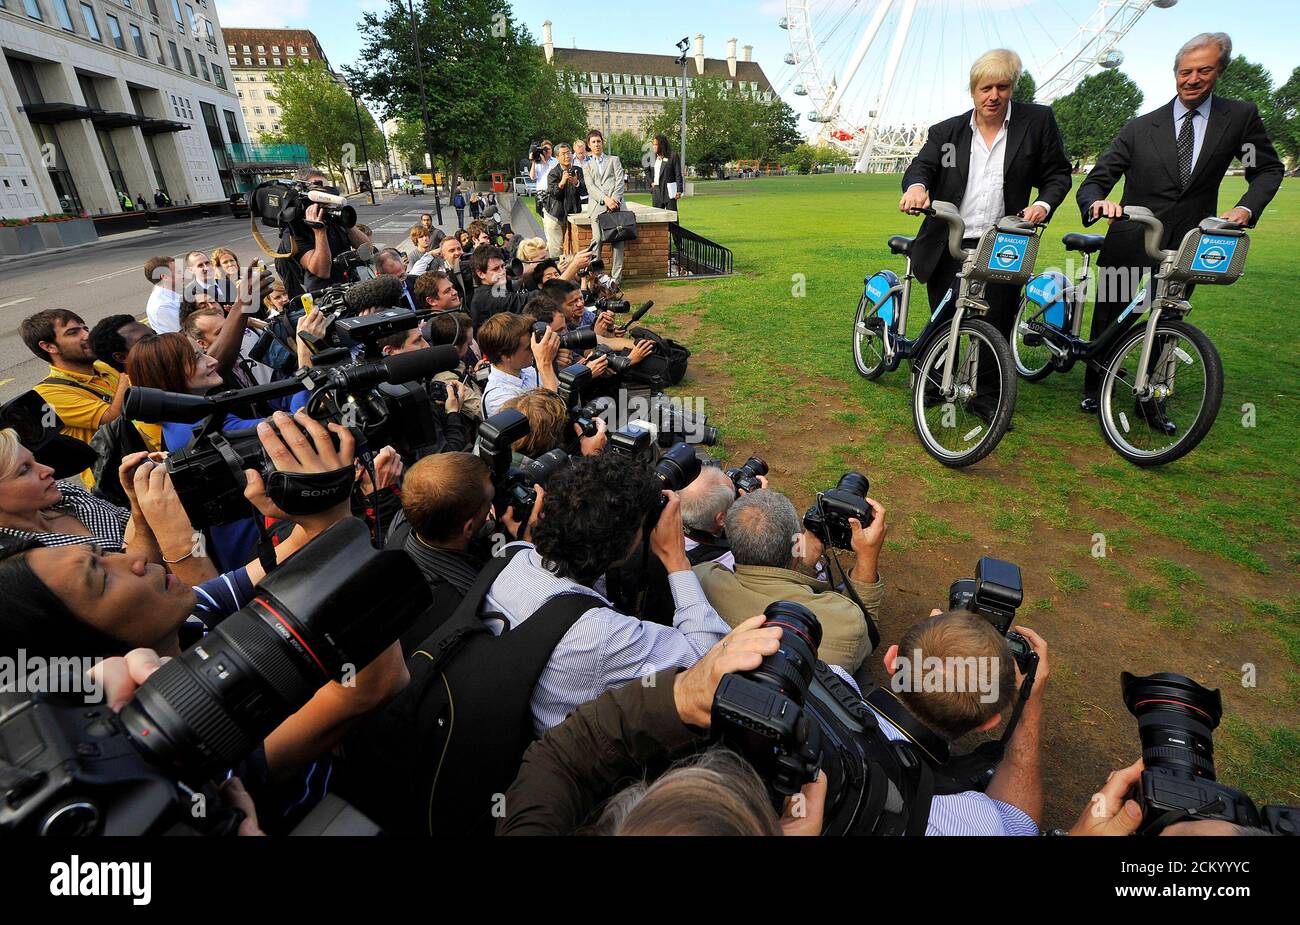 London Mayor Boris Johnson (L) and Chairman of Barclays Marcus Agius pose for photographers with hire cycles beside the London Eye in central London July 30, 2010. A fleet of 6,000 bicycles for hire hit the streets of central London on Friday in a scheme intended to fuel a cycling revolution in the congested capital. The initiative, which follows similar projects in cities including Paris and Montreal, aims to ease overcrowding on London's commuter network, with 400 bicycle 'docking stations' from Notting Hill in the west to the Tower of London in the east. REUTERS/Toby Melville (BRITAIN - Tag Stock Photo